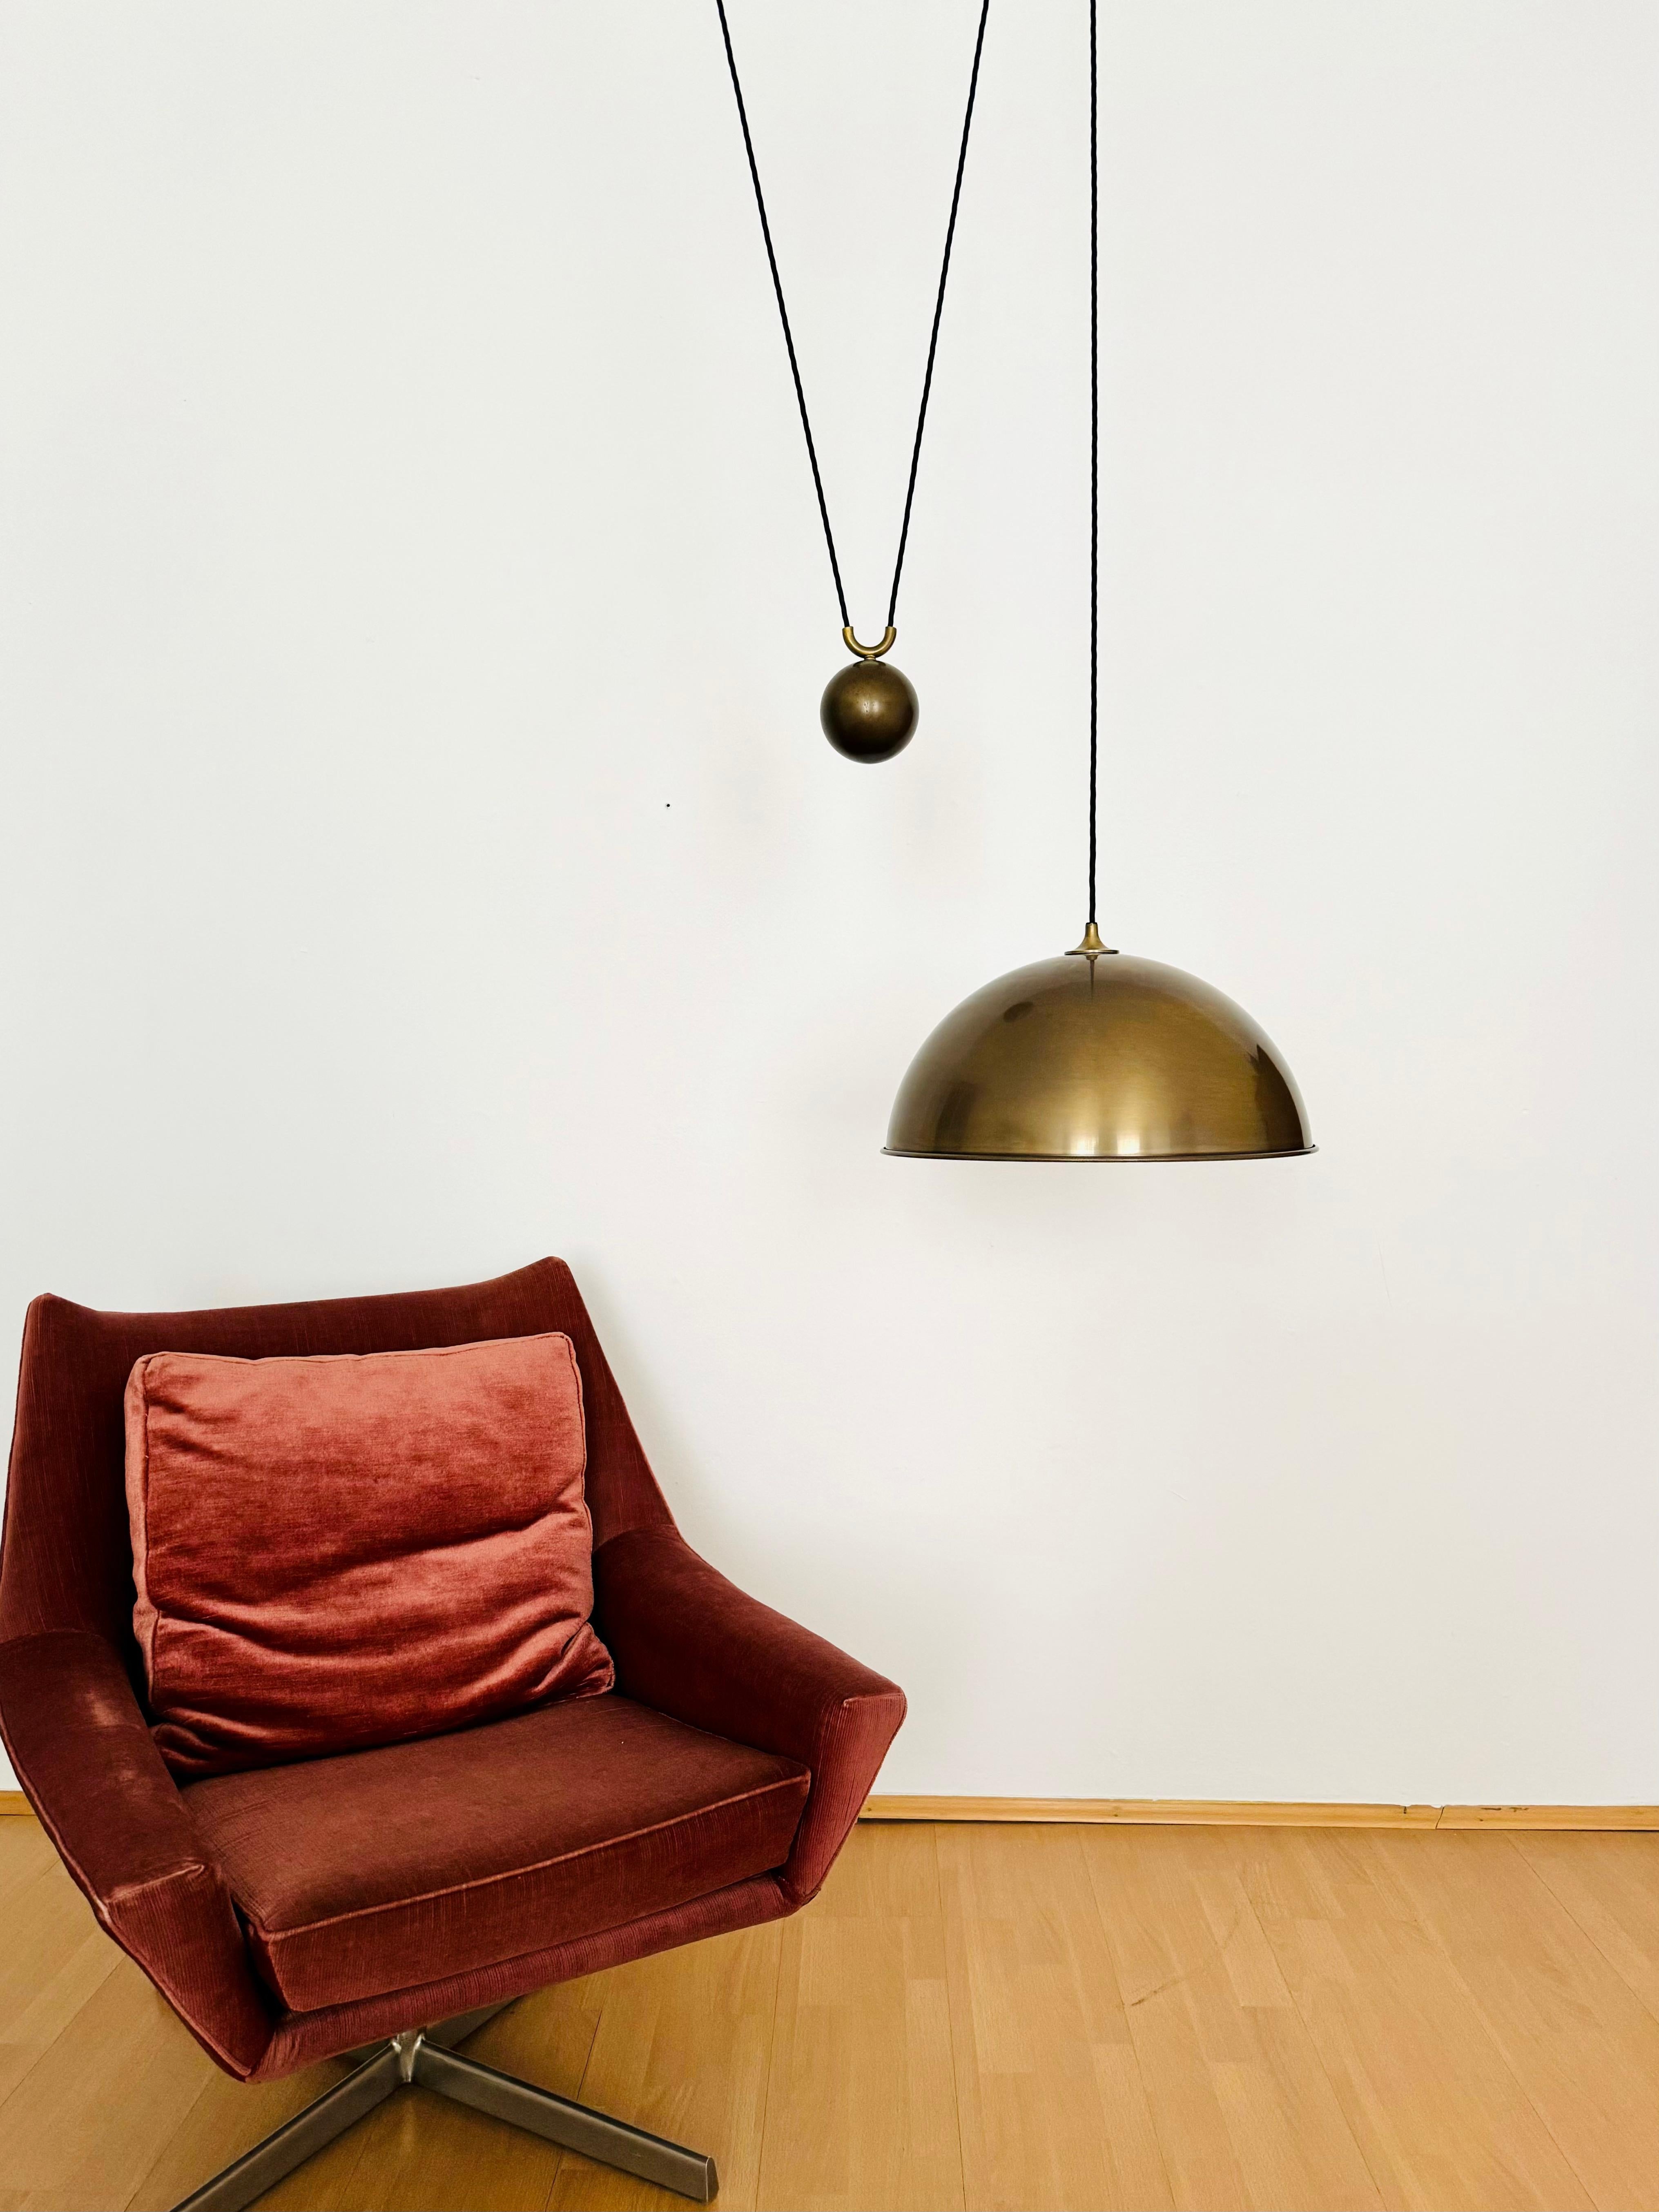 Adjustable Burnished Posa 44 Pendant Lamp by Florian Schulz In Good Condition For Sale In München, DE